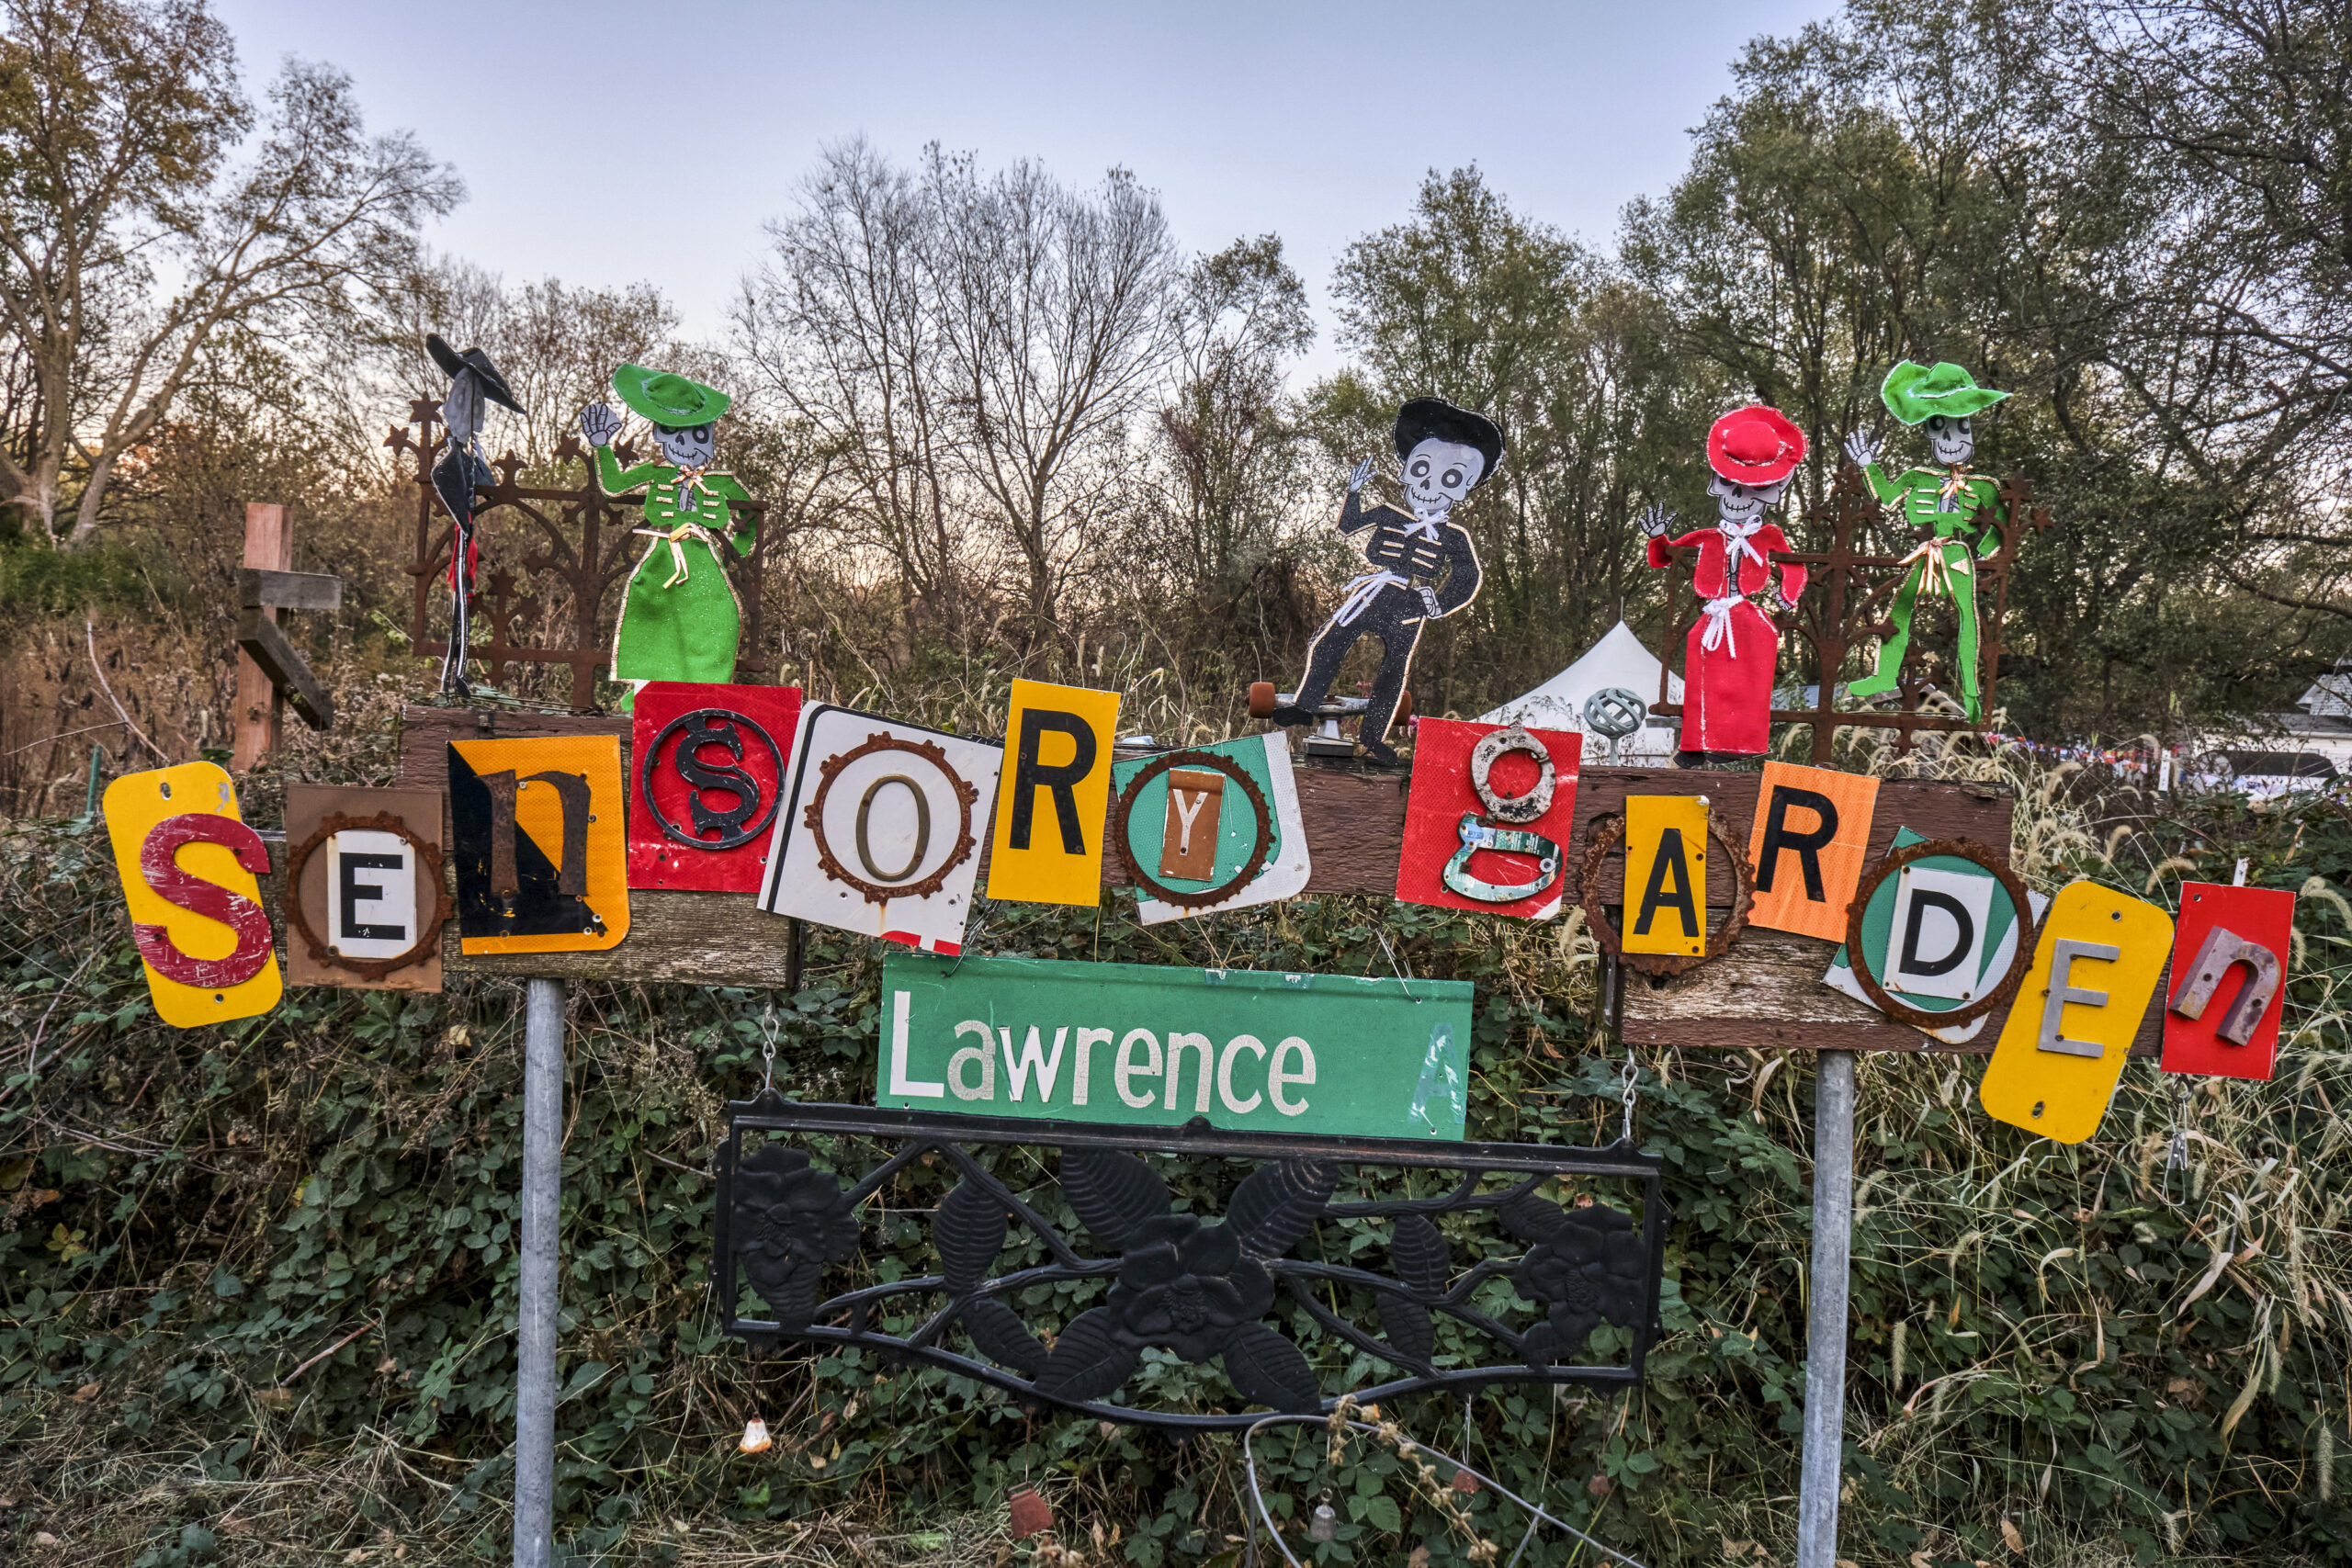 "Sensory Garden" is spelled out in individual block letters on a wooden sign. "Lawrence" is written in white text on a green background, similar to a street sign.